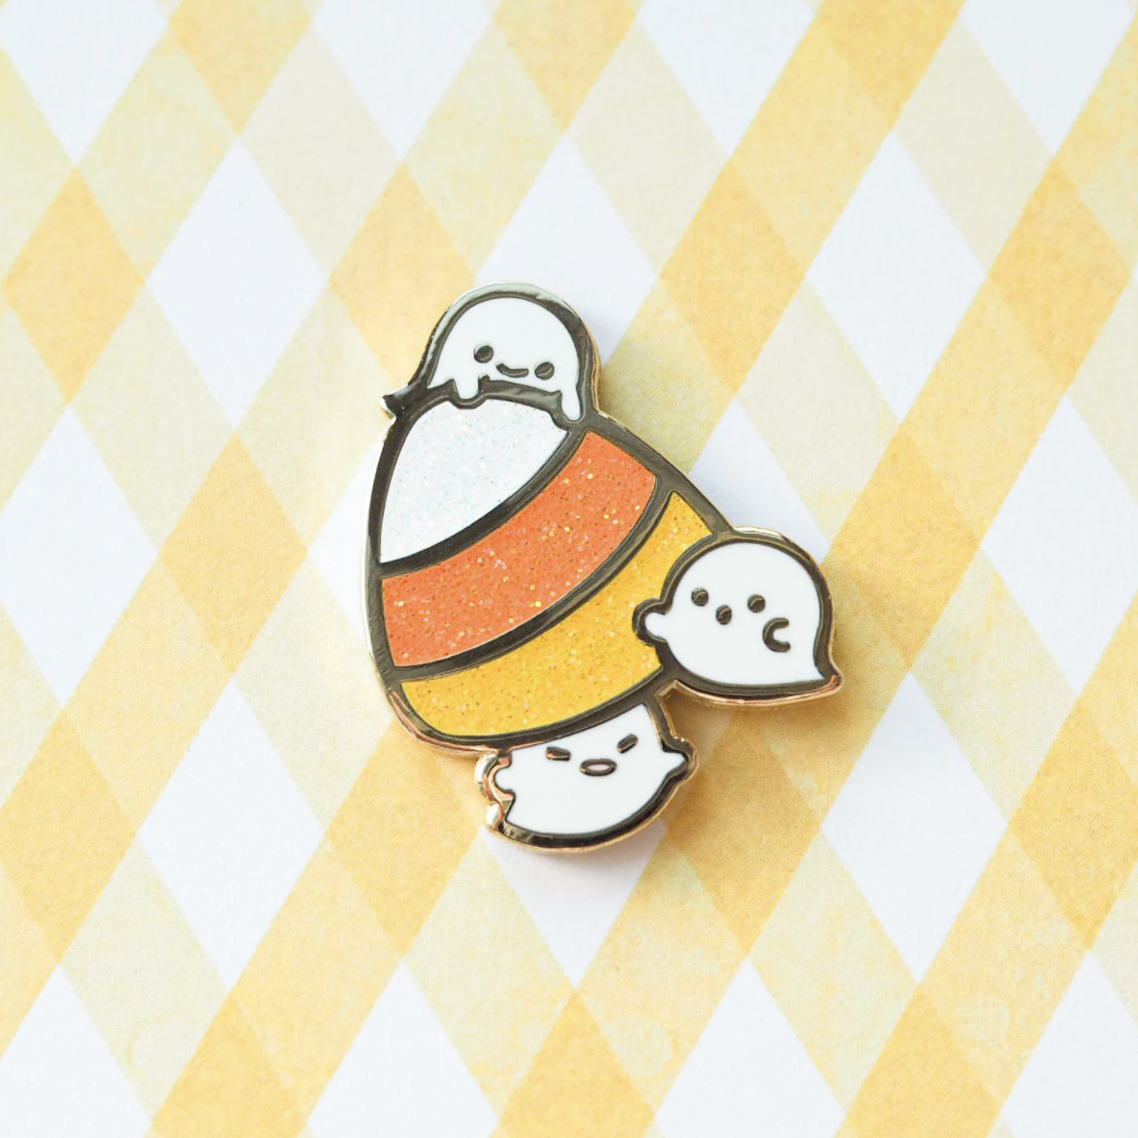 Cute ghosts floating around a sparkly candy corn.